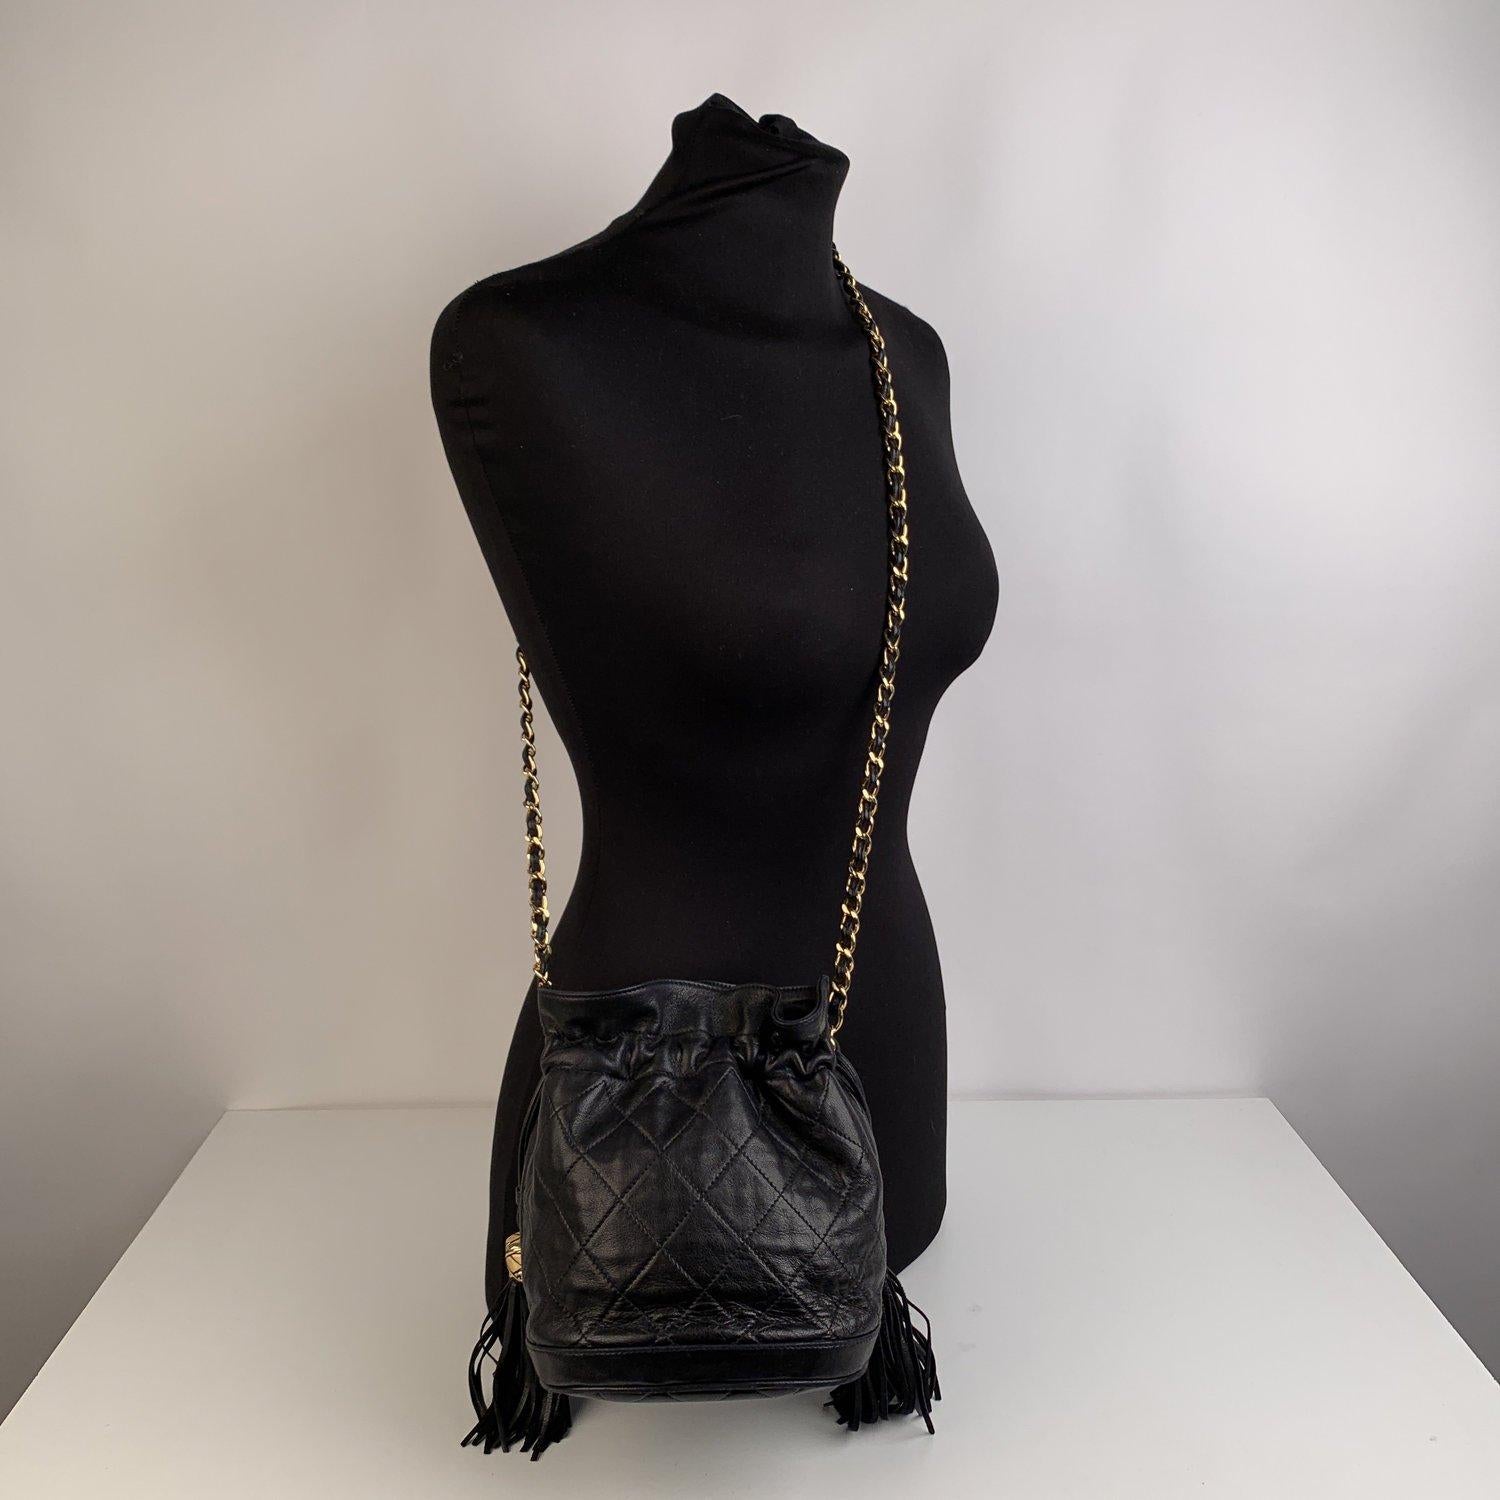 This beautiful Bag will come with a Certificate of Authenticity provided by Entrupy, leading International Fashion Authenticators. The certificate will be provided at no further cost.

Beautiful small vintage CHANEL drawstring bucket. Made of